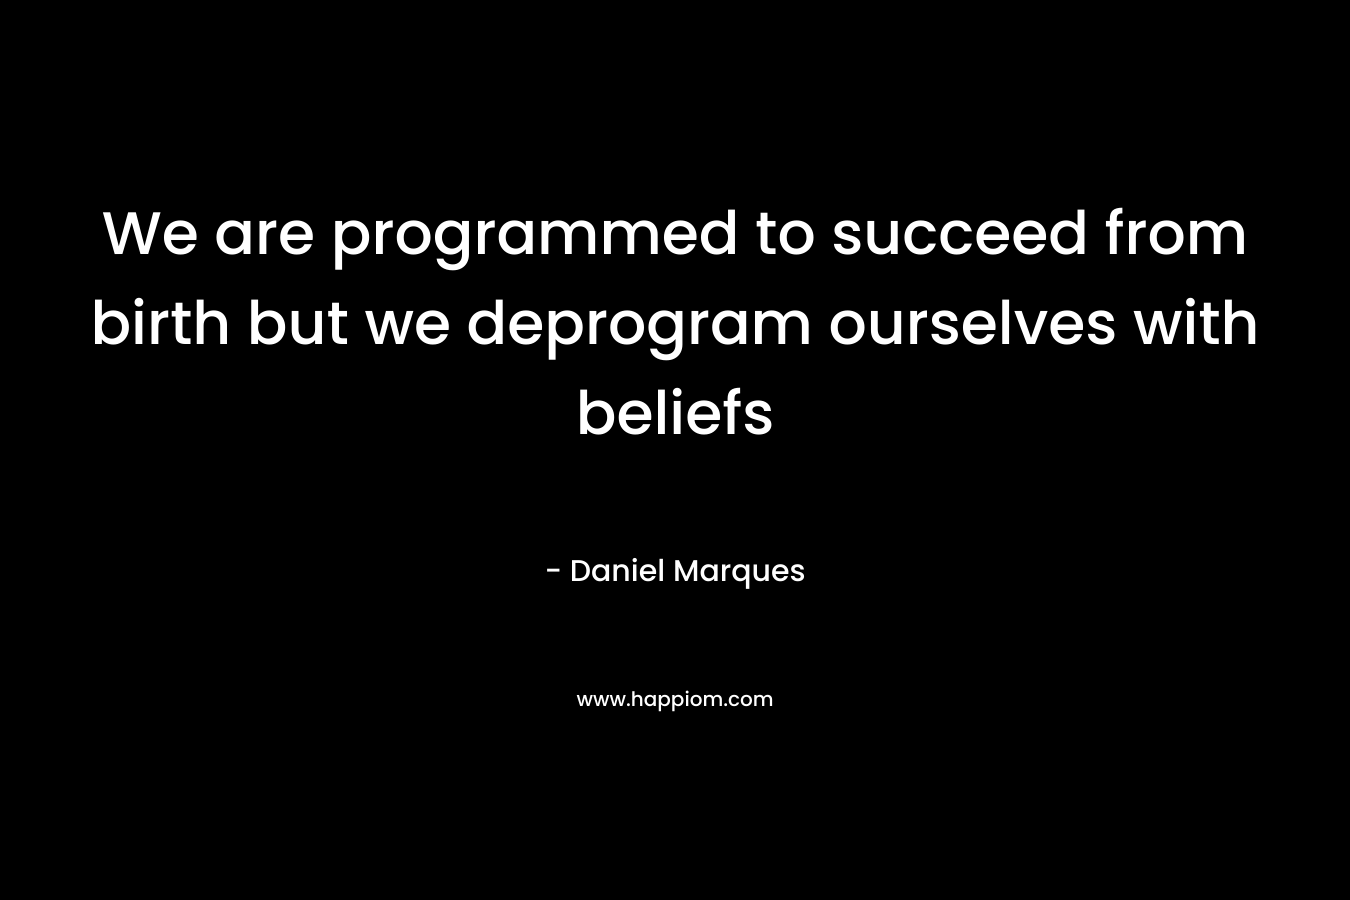 We are programmed to succeed from birth but we deprogram ourselves with beliefs – Daniel Marques